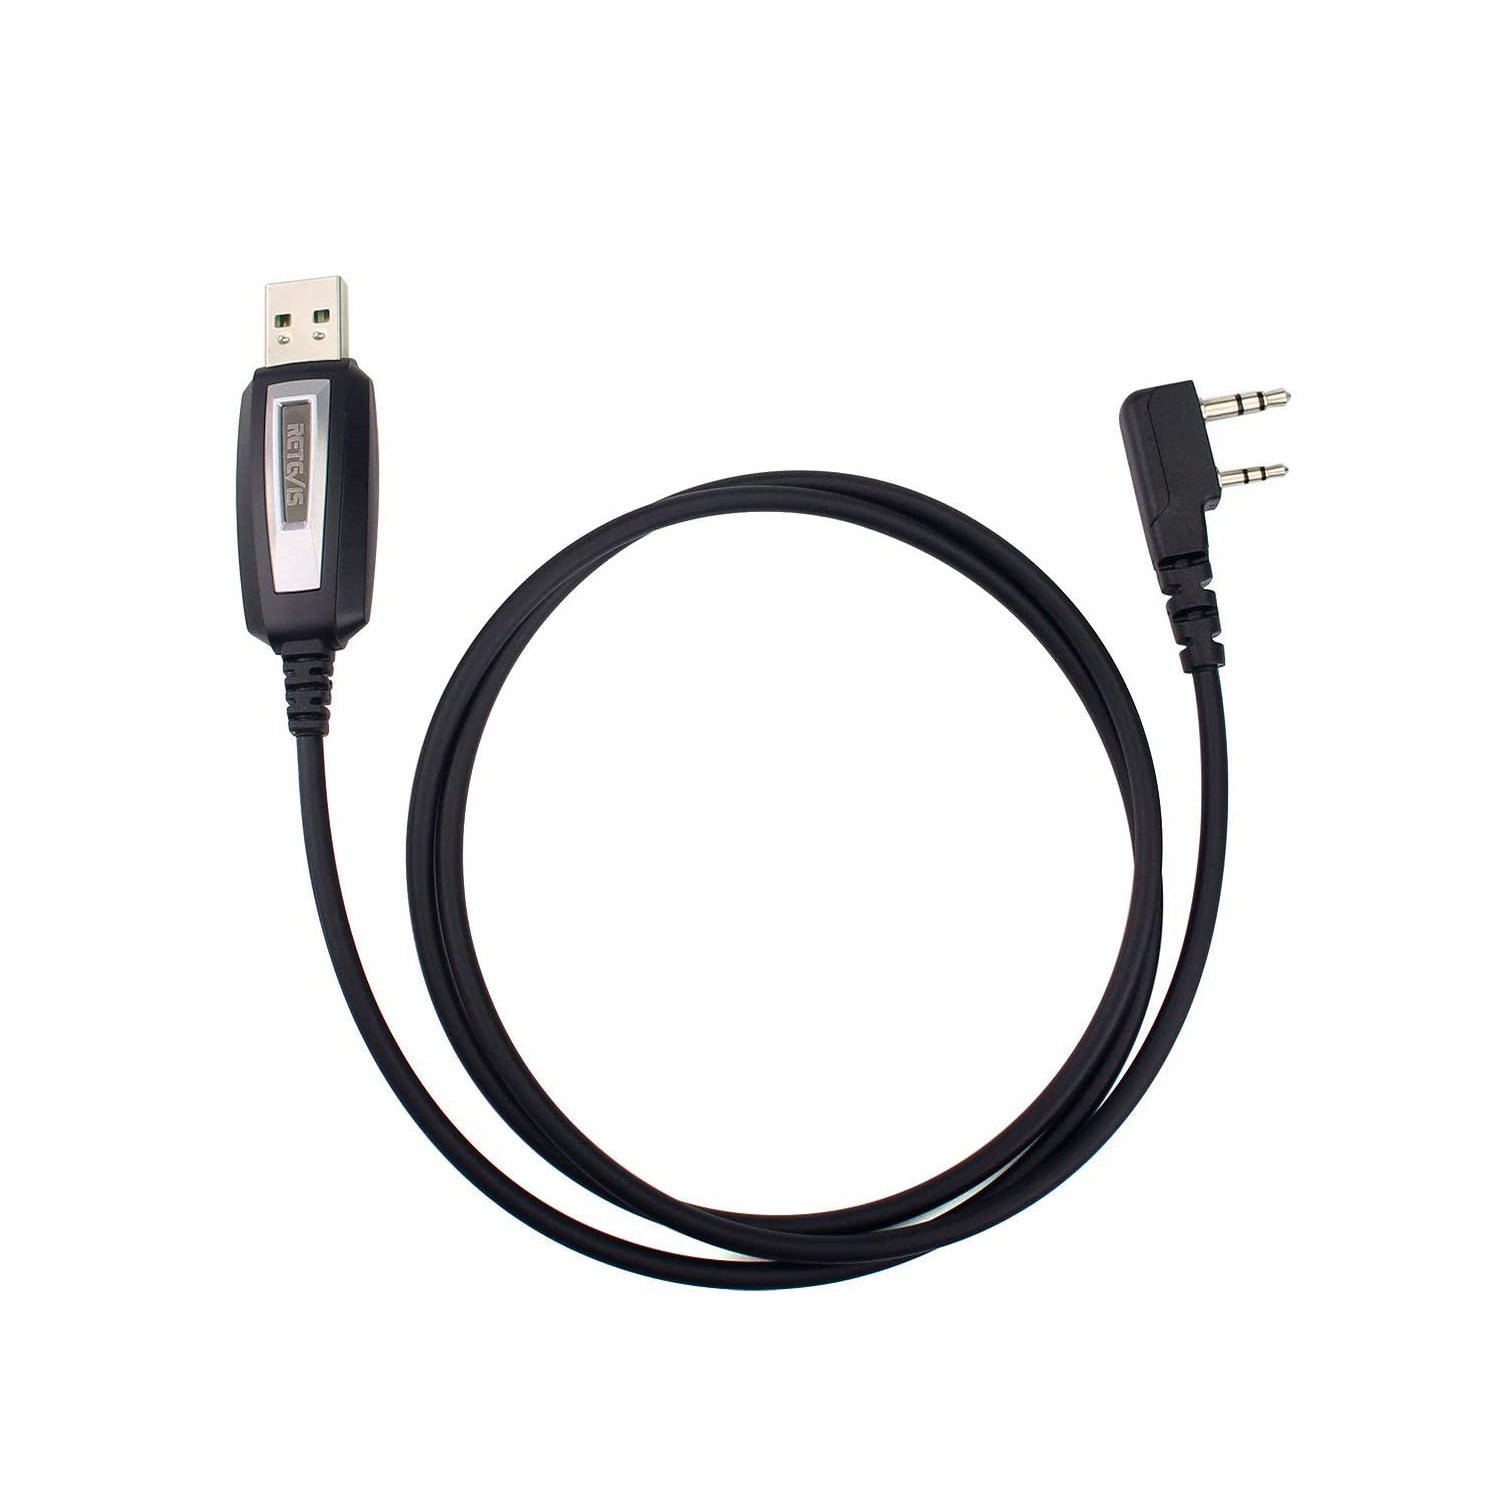 [2 PIN PROGRAMMING CABLE] For Retevis RT5R - BIGTENT, Retevis